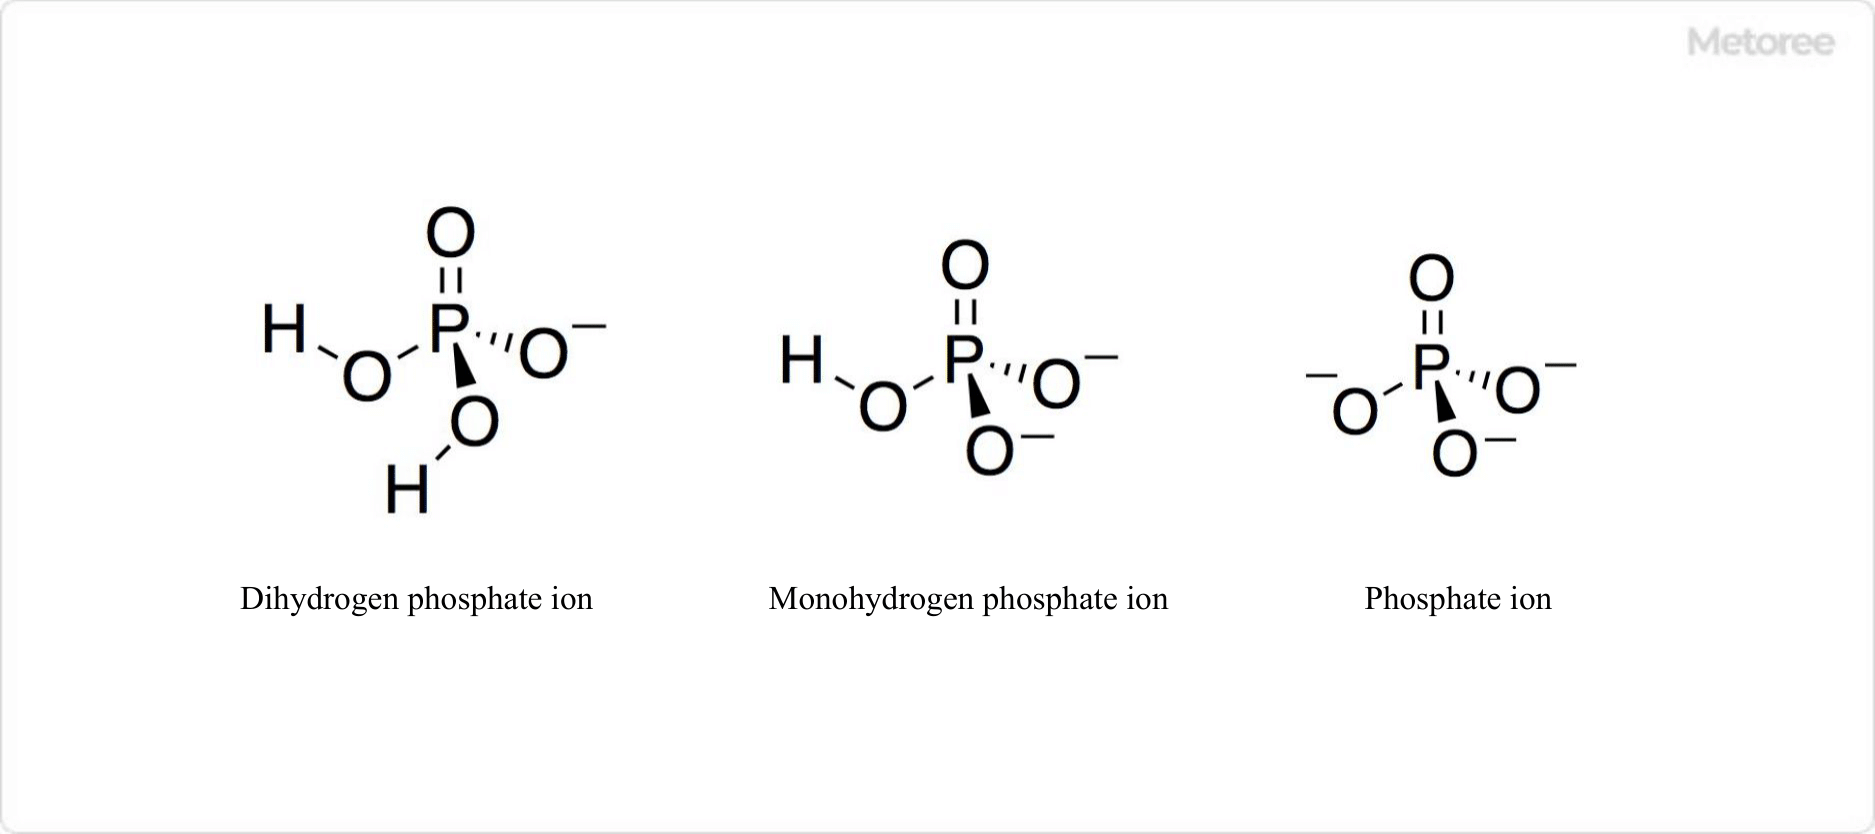 Figure 2. Structure of phosphate ion